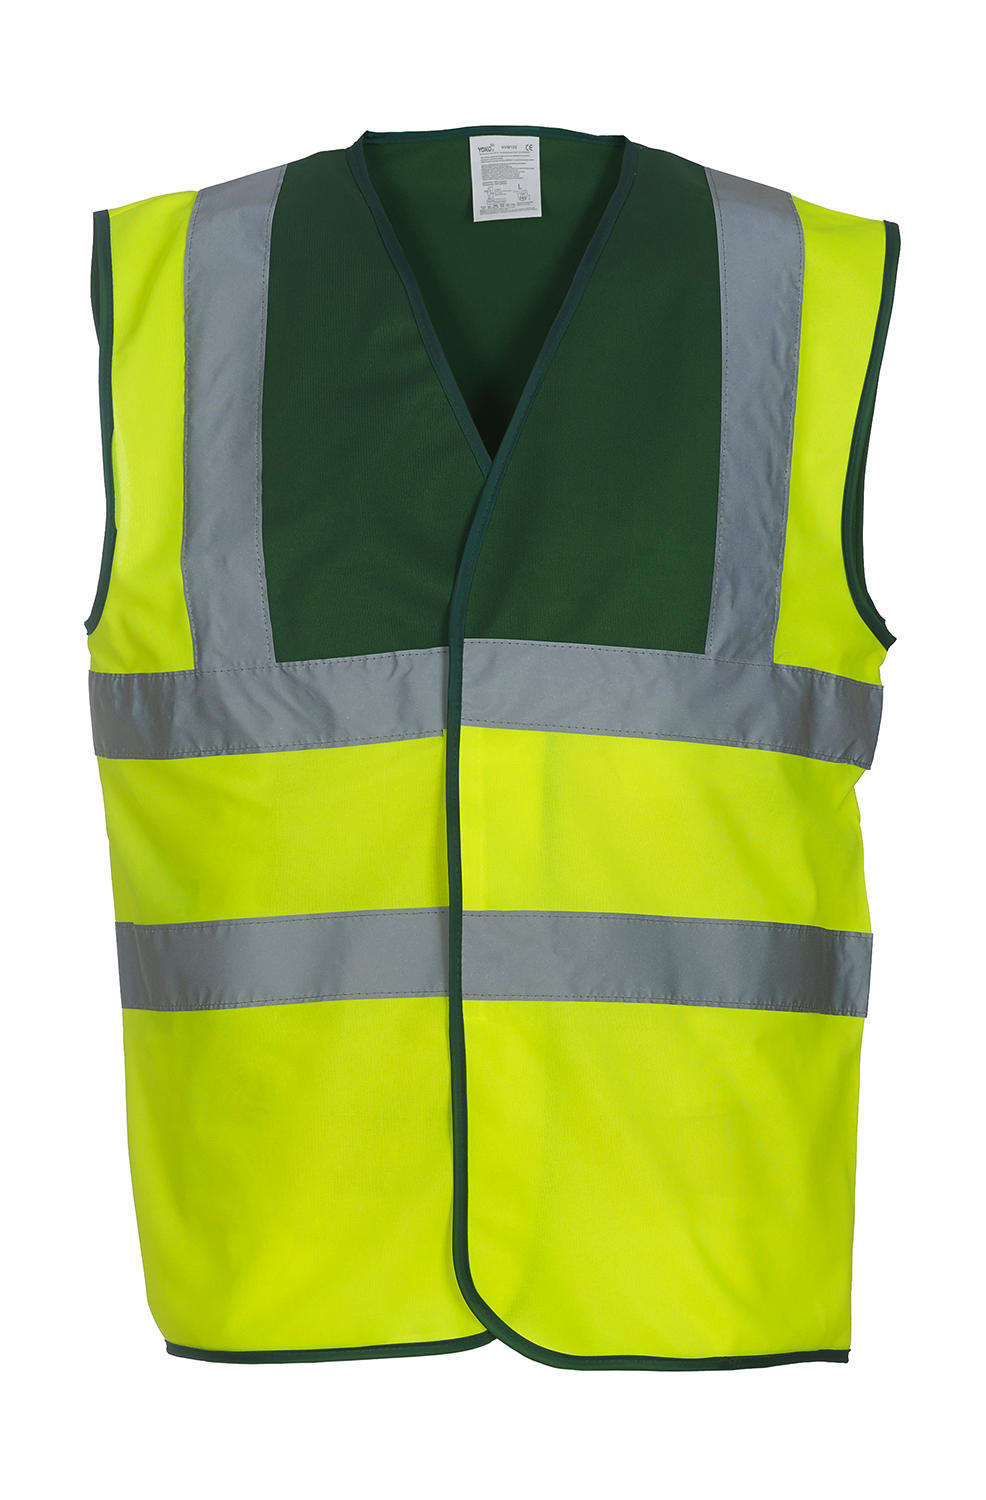  Fluo 2 Band + Brace Waistcoat in Farbe Fluo Yellow/Paramedic Green